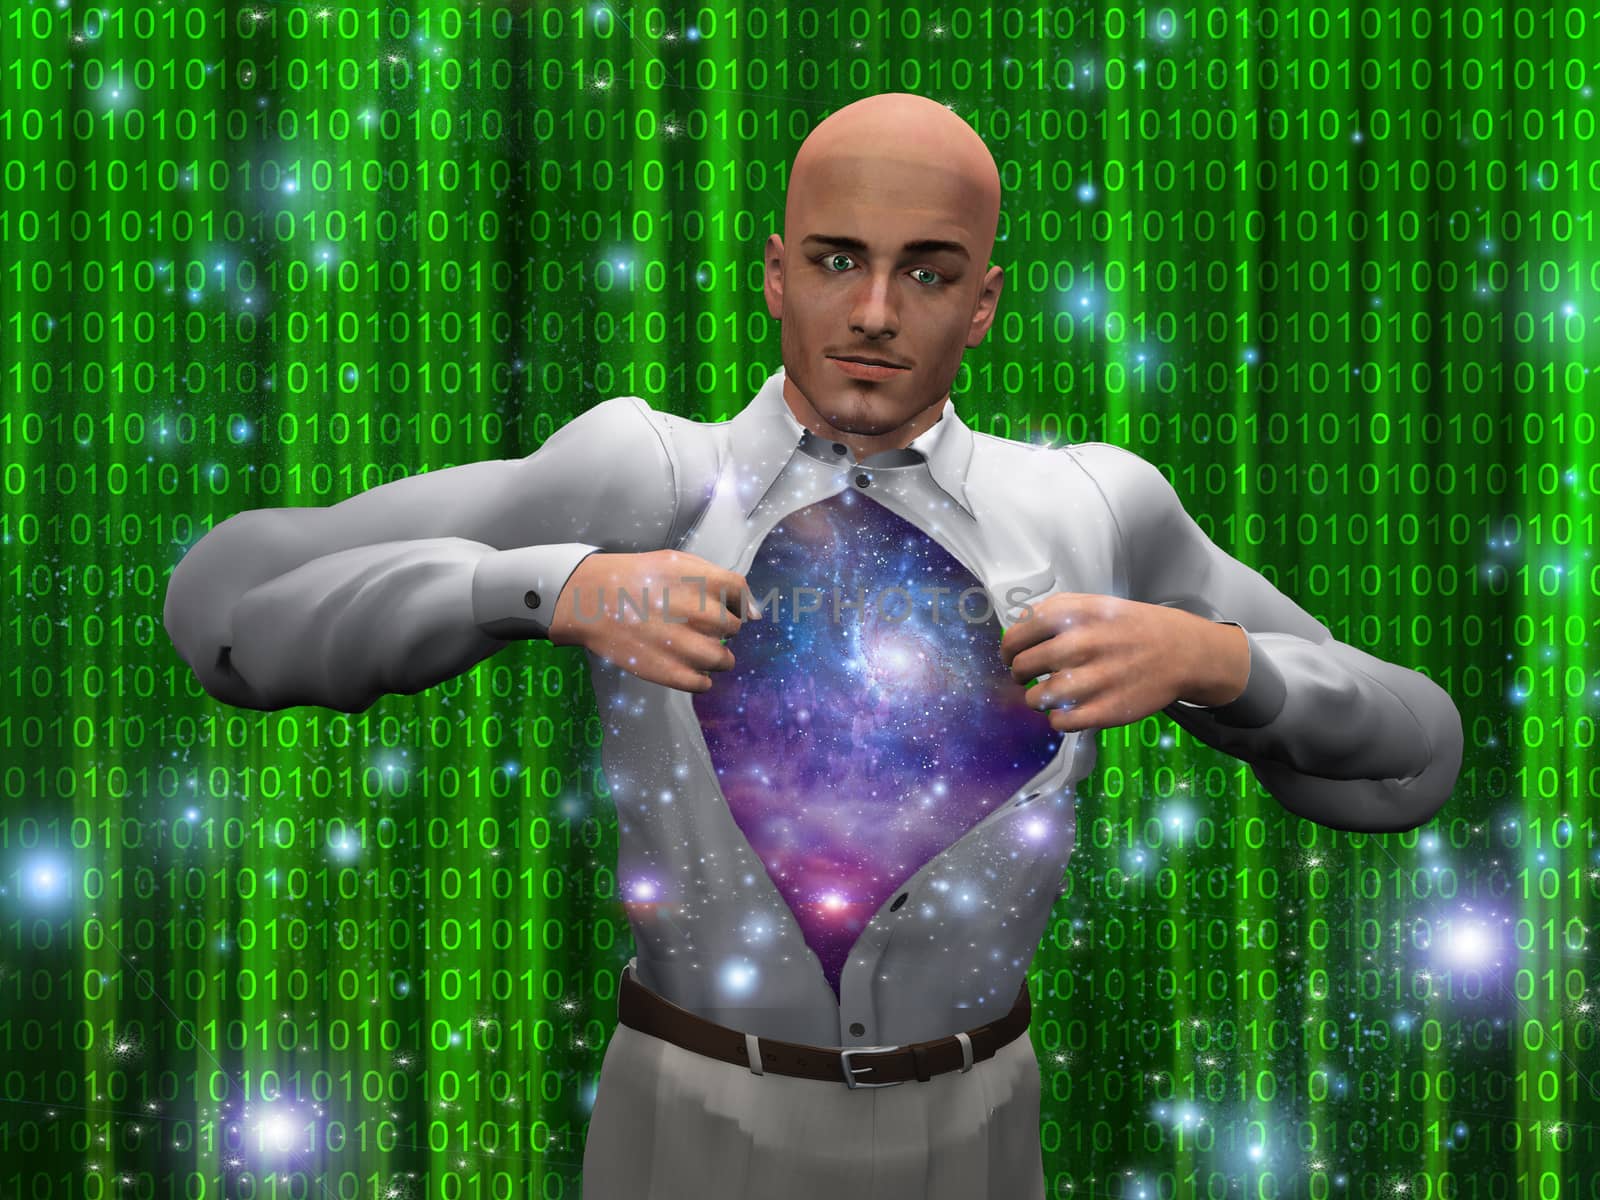 Man opens shirt to reveal galaxies before binary streams